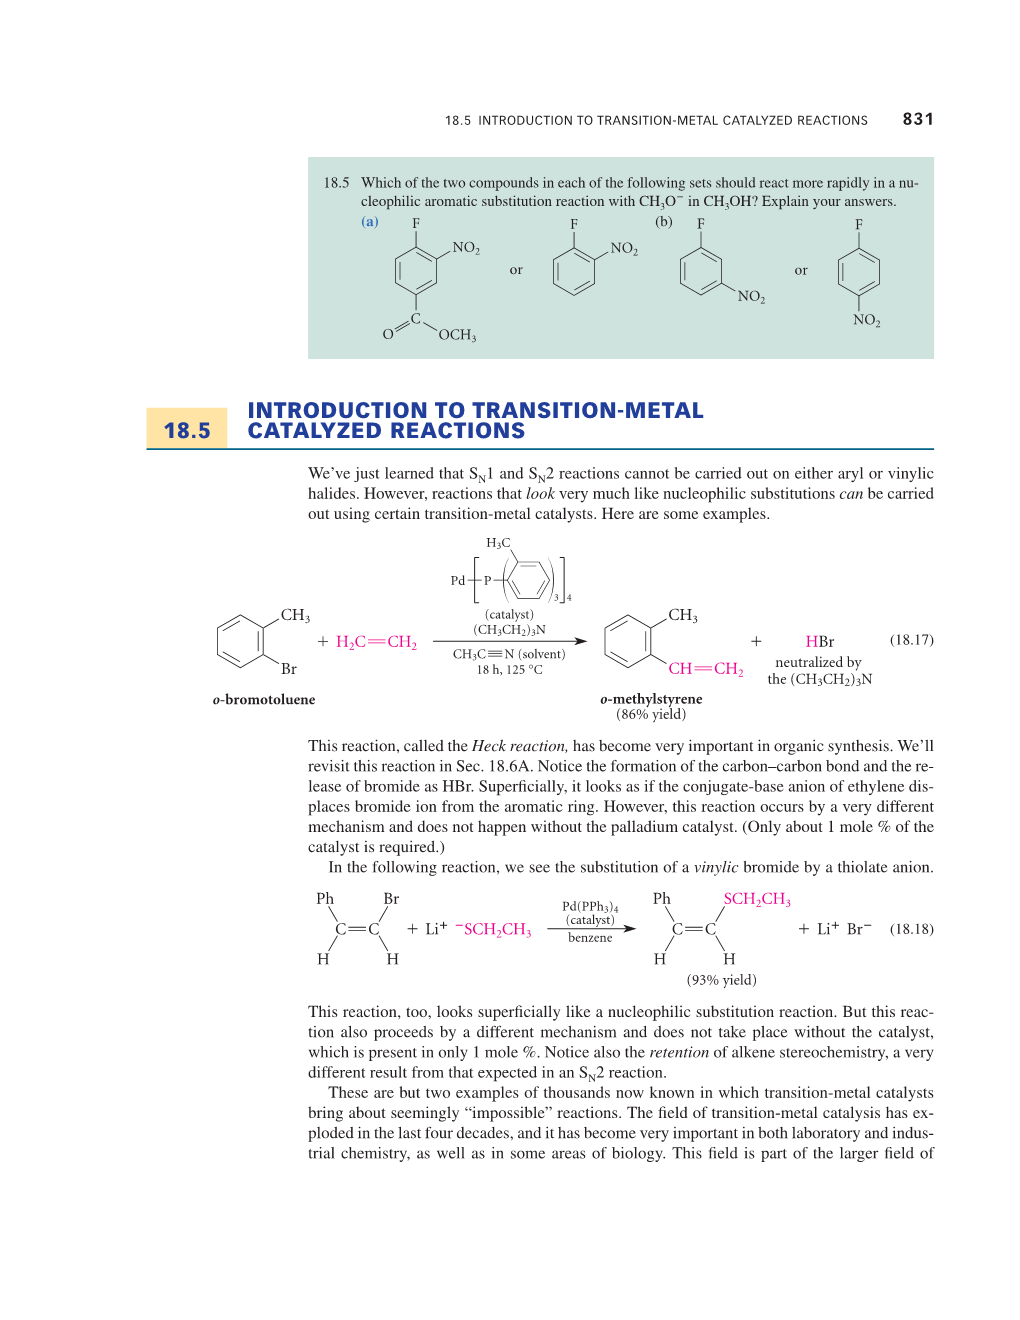 18.5 Introduction to Transition-Metal Catalyzed Reactions 831